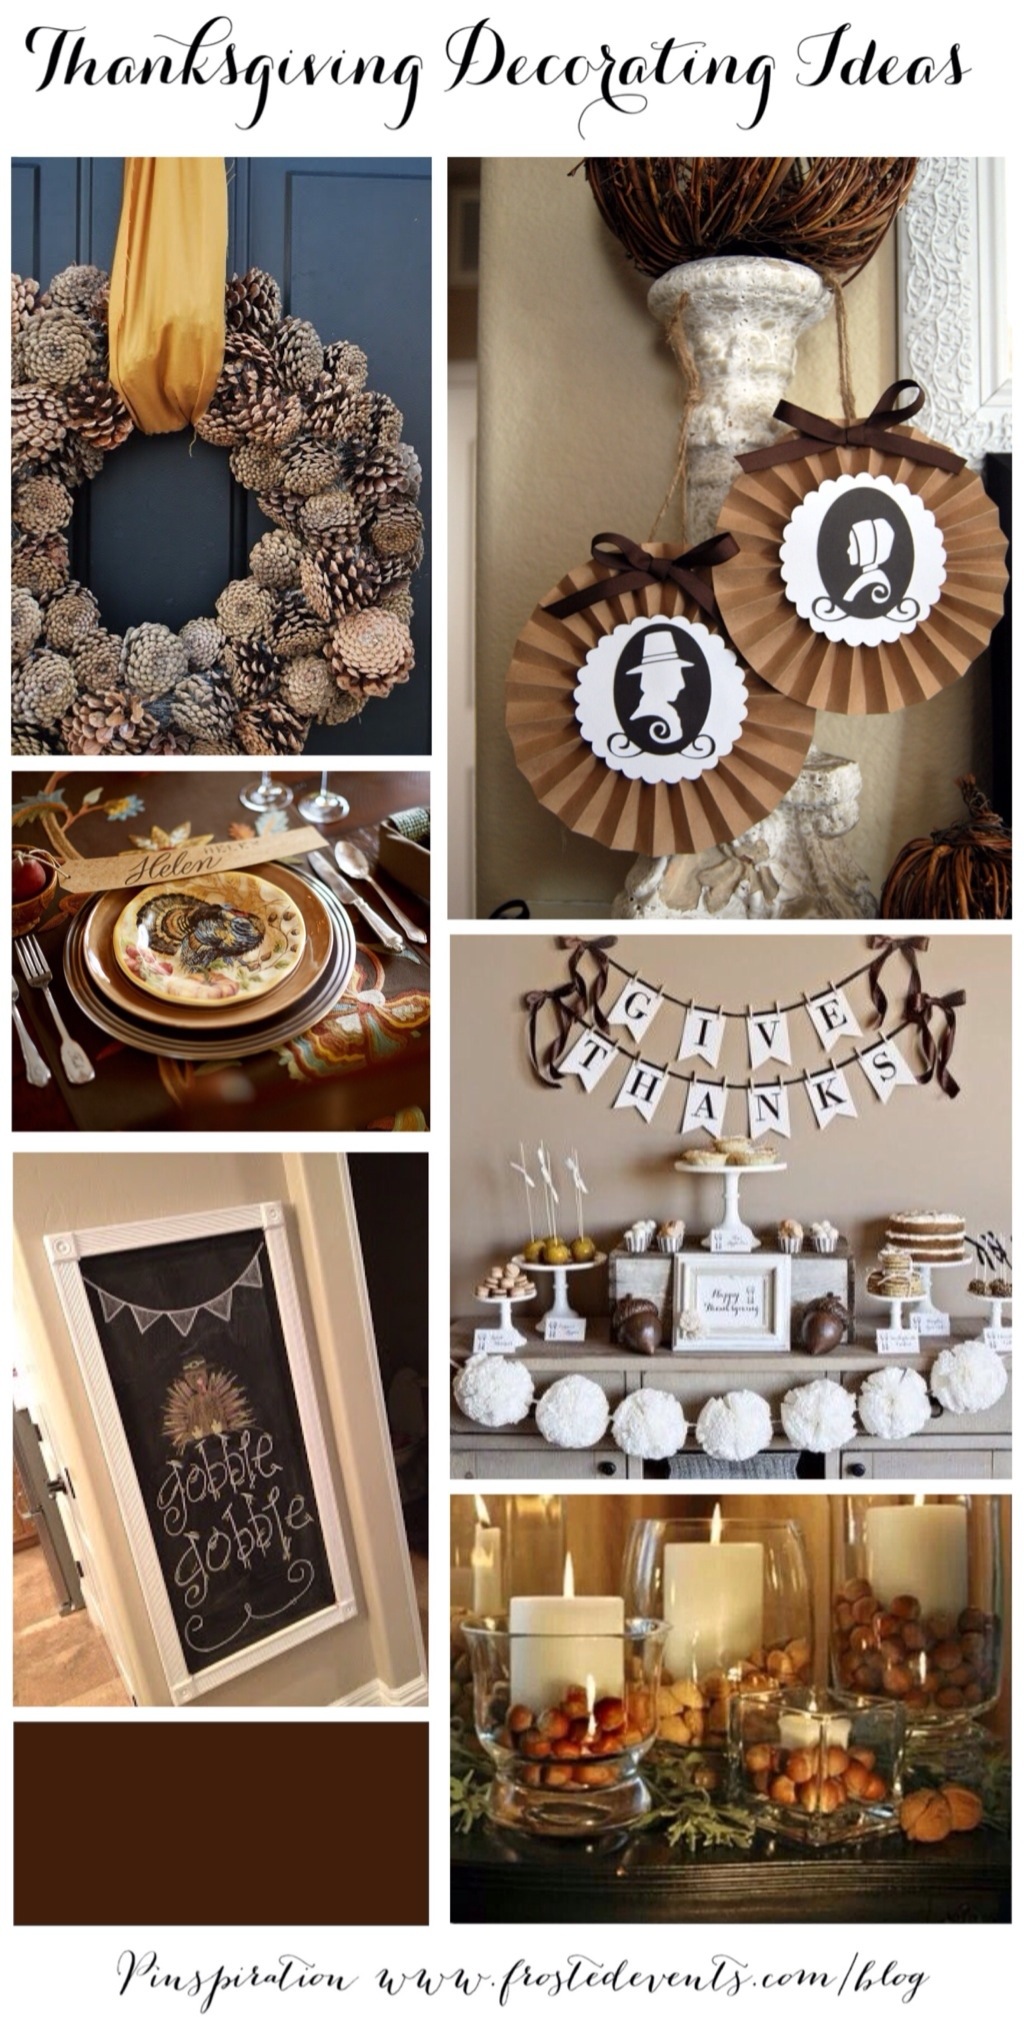 Thanksgiving Decorating Ideas & Inspiration www.frostedevents.com